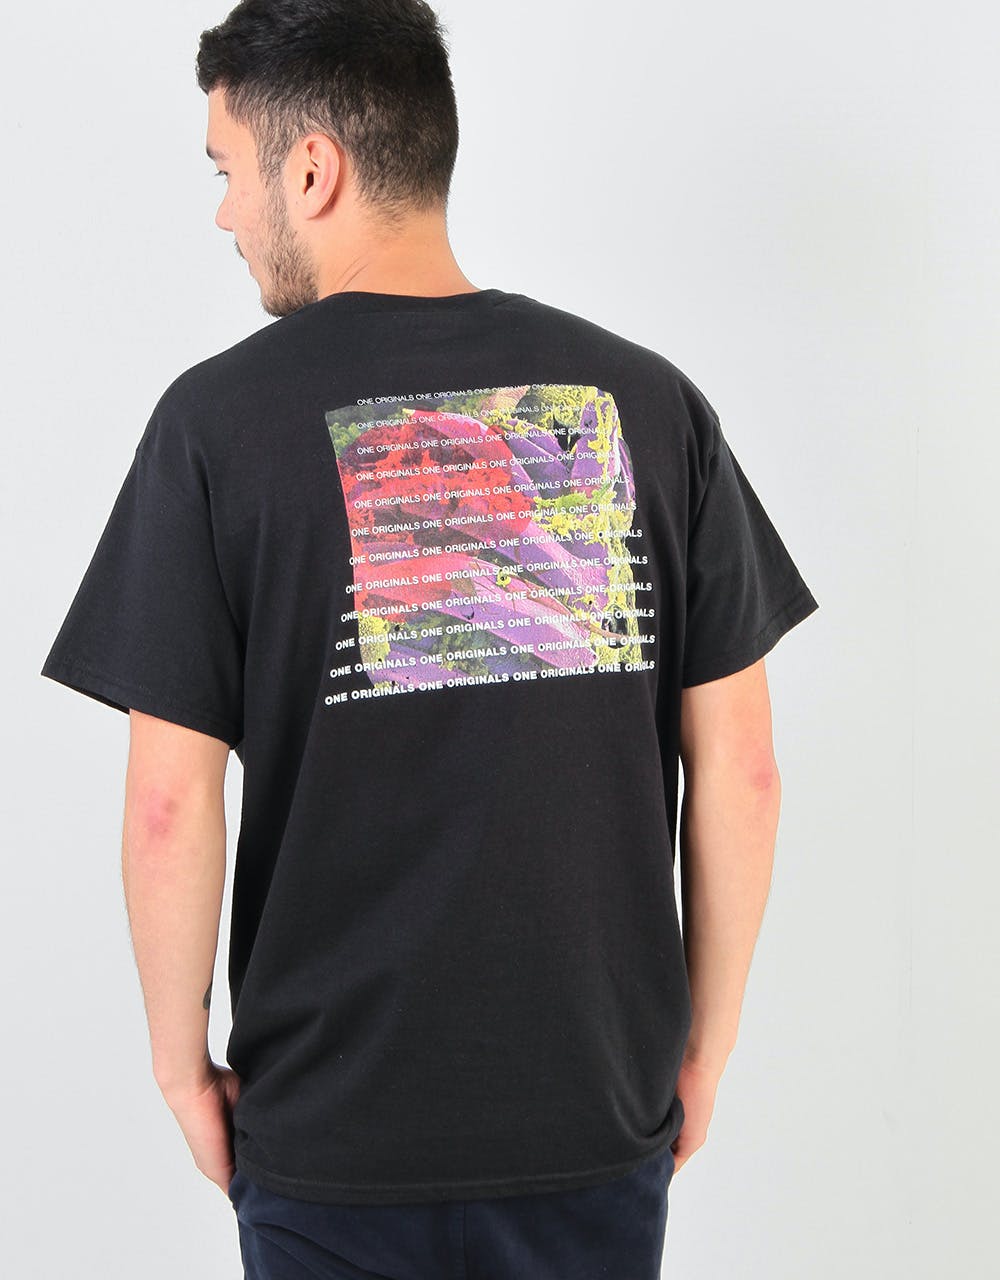 Route One Bacteria T-Shirt - Black